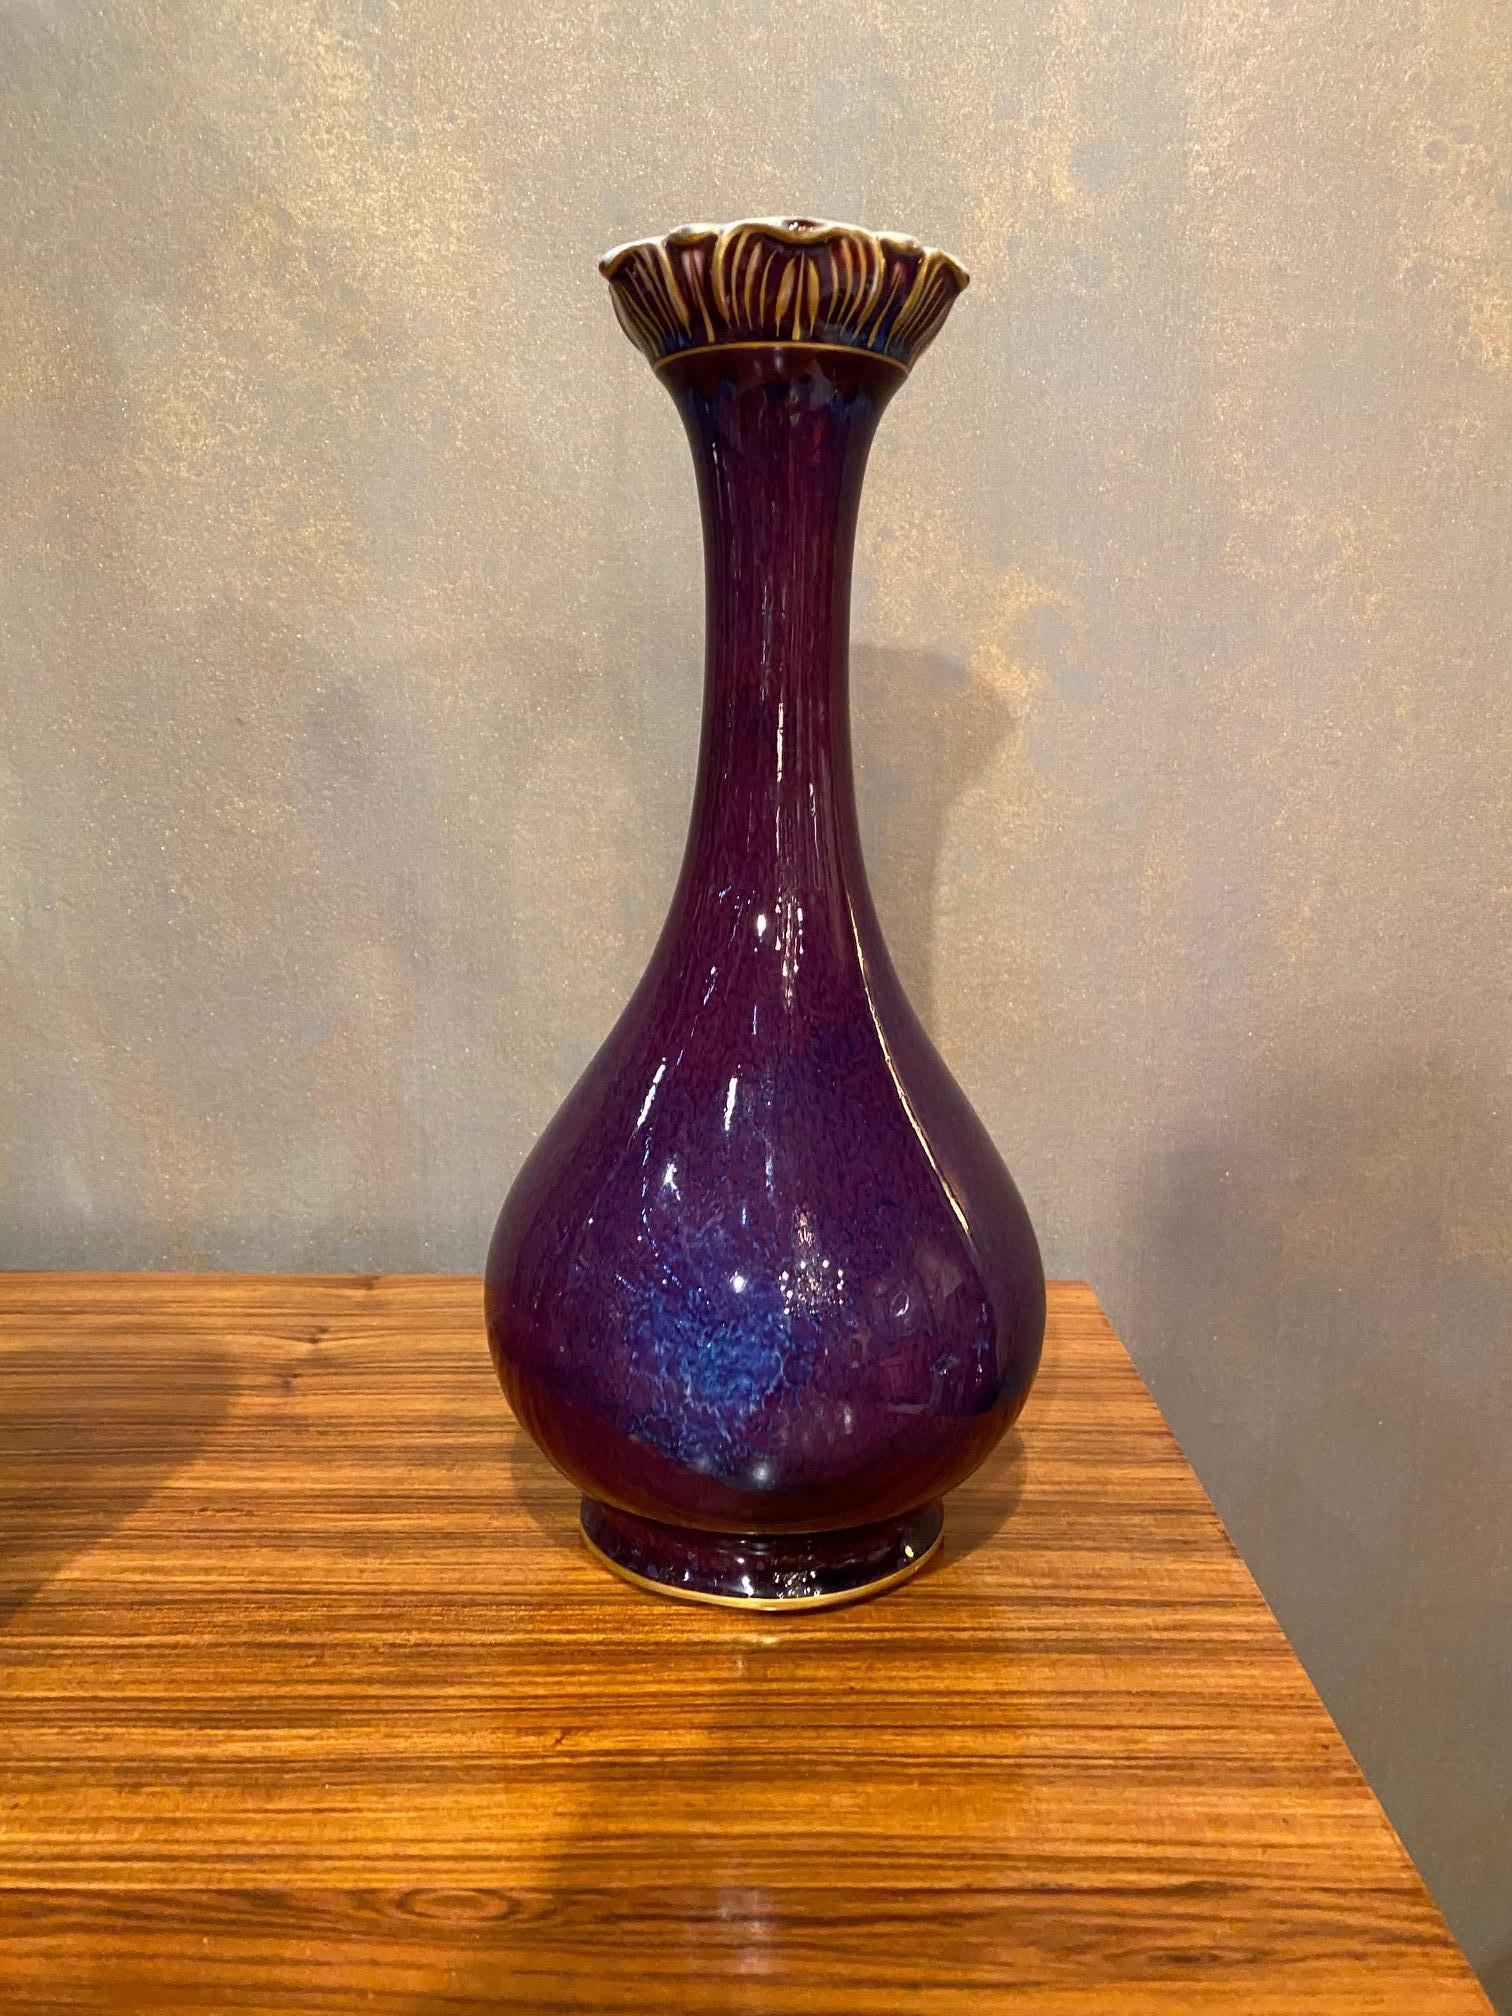 Glazed oxblood vase by Hermann Seger for KPM. Ink-stamped manufacturer's mark to underside of smaller example 'S.gr.P' with scepter mark and incised number 'PM 3060'. Germany: circa 1890 Hermann August Seger (1839-1893), produced numerous glaze and